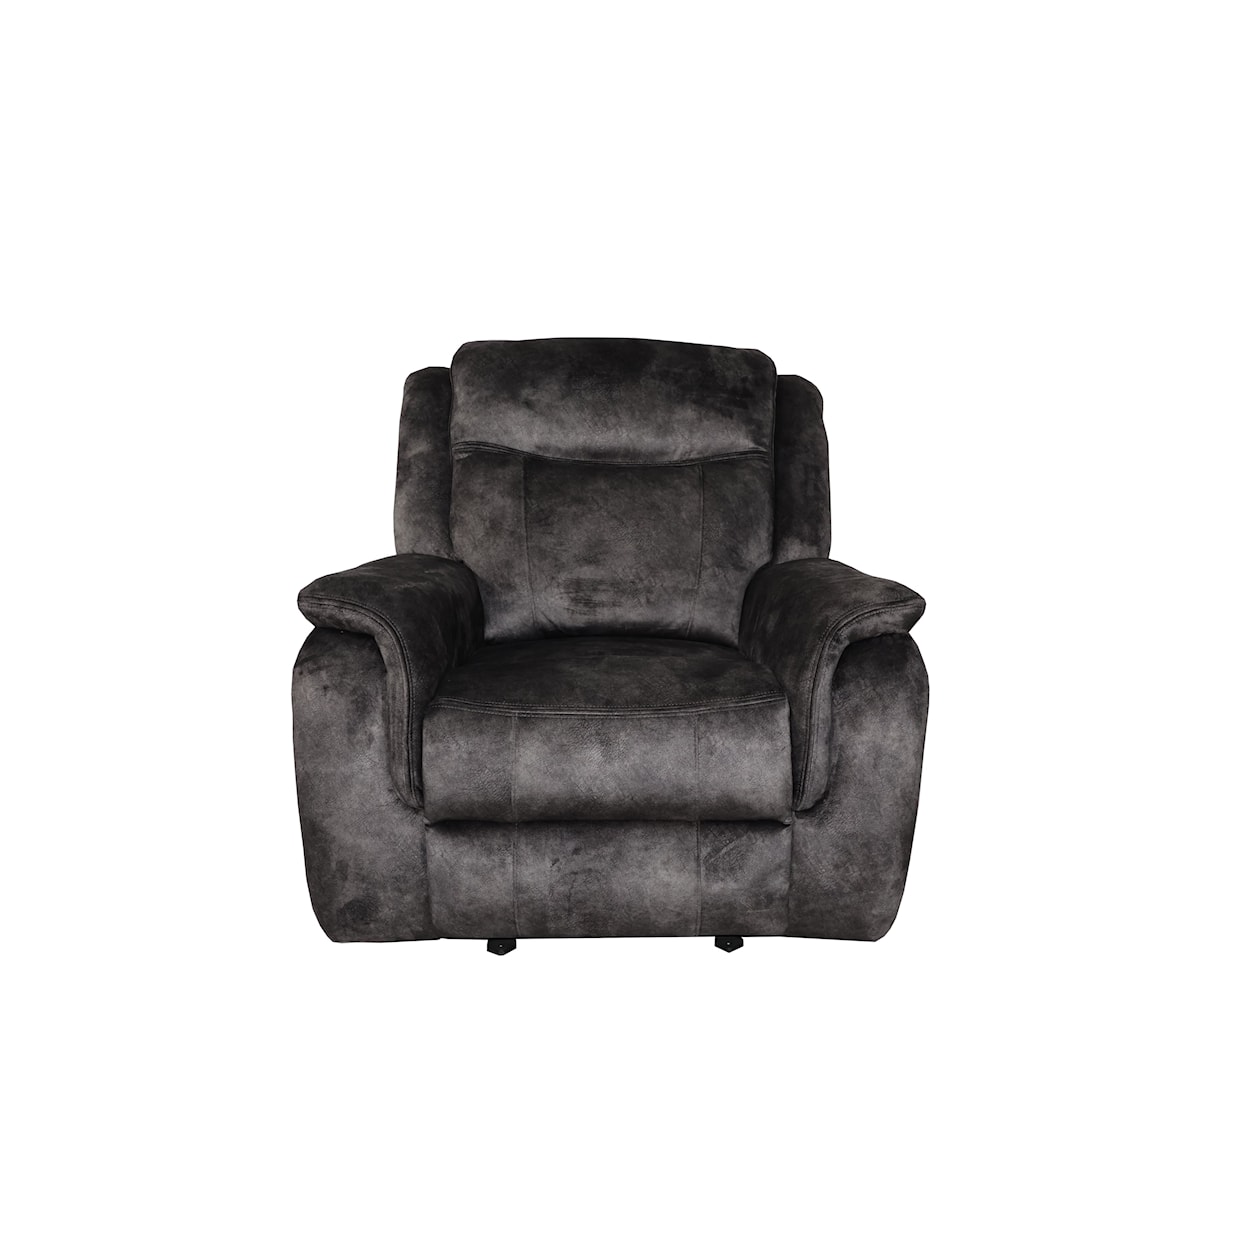 New Classic Furniture Park City Upholstered Glider Recliner